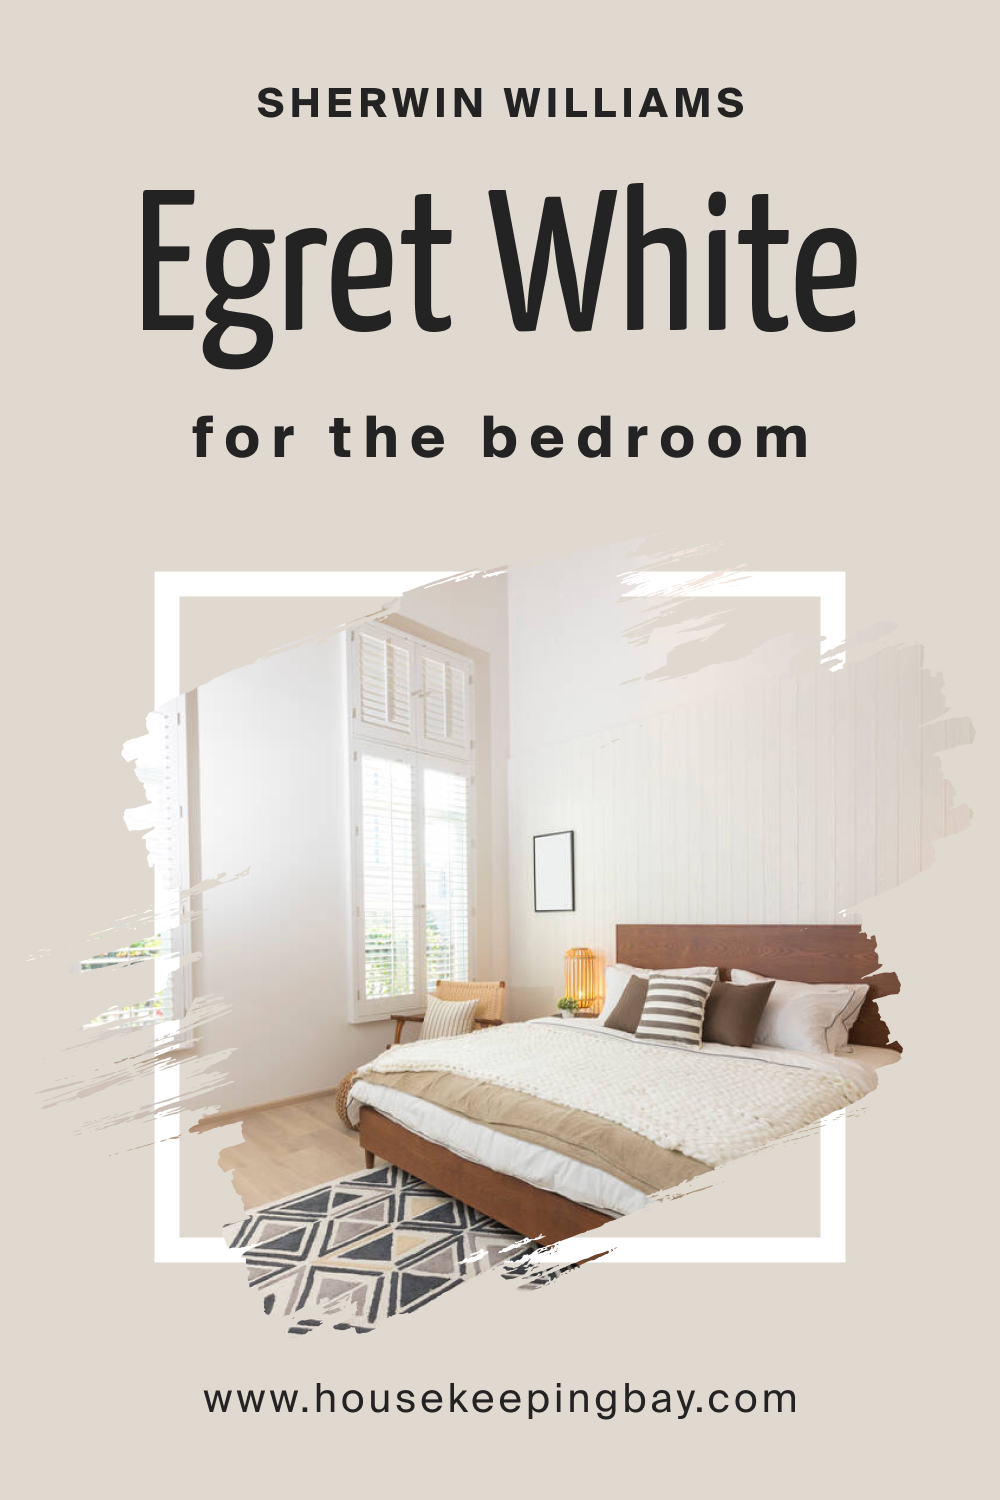 Sherwin Williams. Egret White SW 7570 For the bedroom